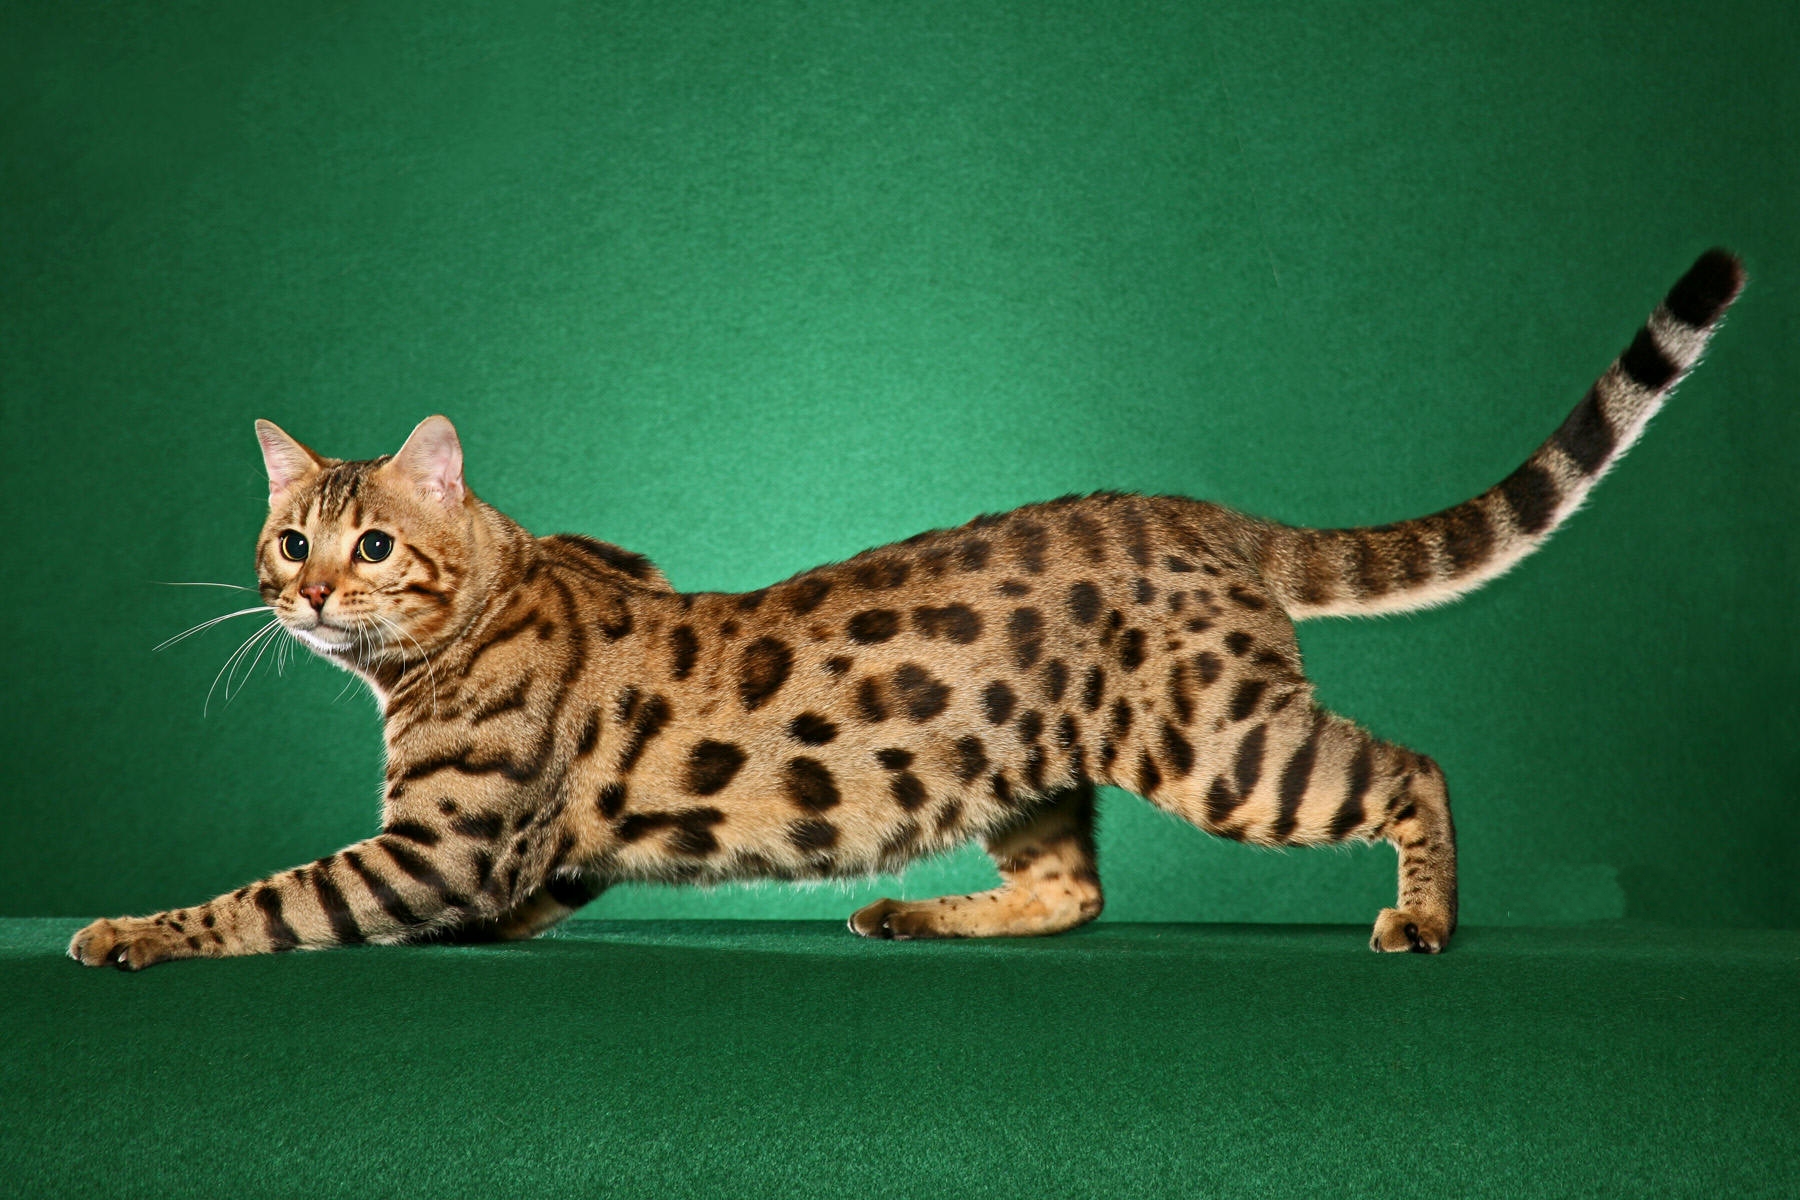 Most Expensive Cat: Cato, a second-generation Bengal (the result of a cross between a house cat and an Asian Leopard cat).
Price: $41,435.